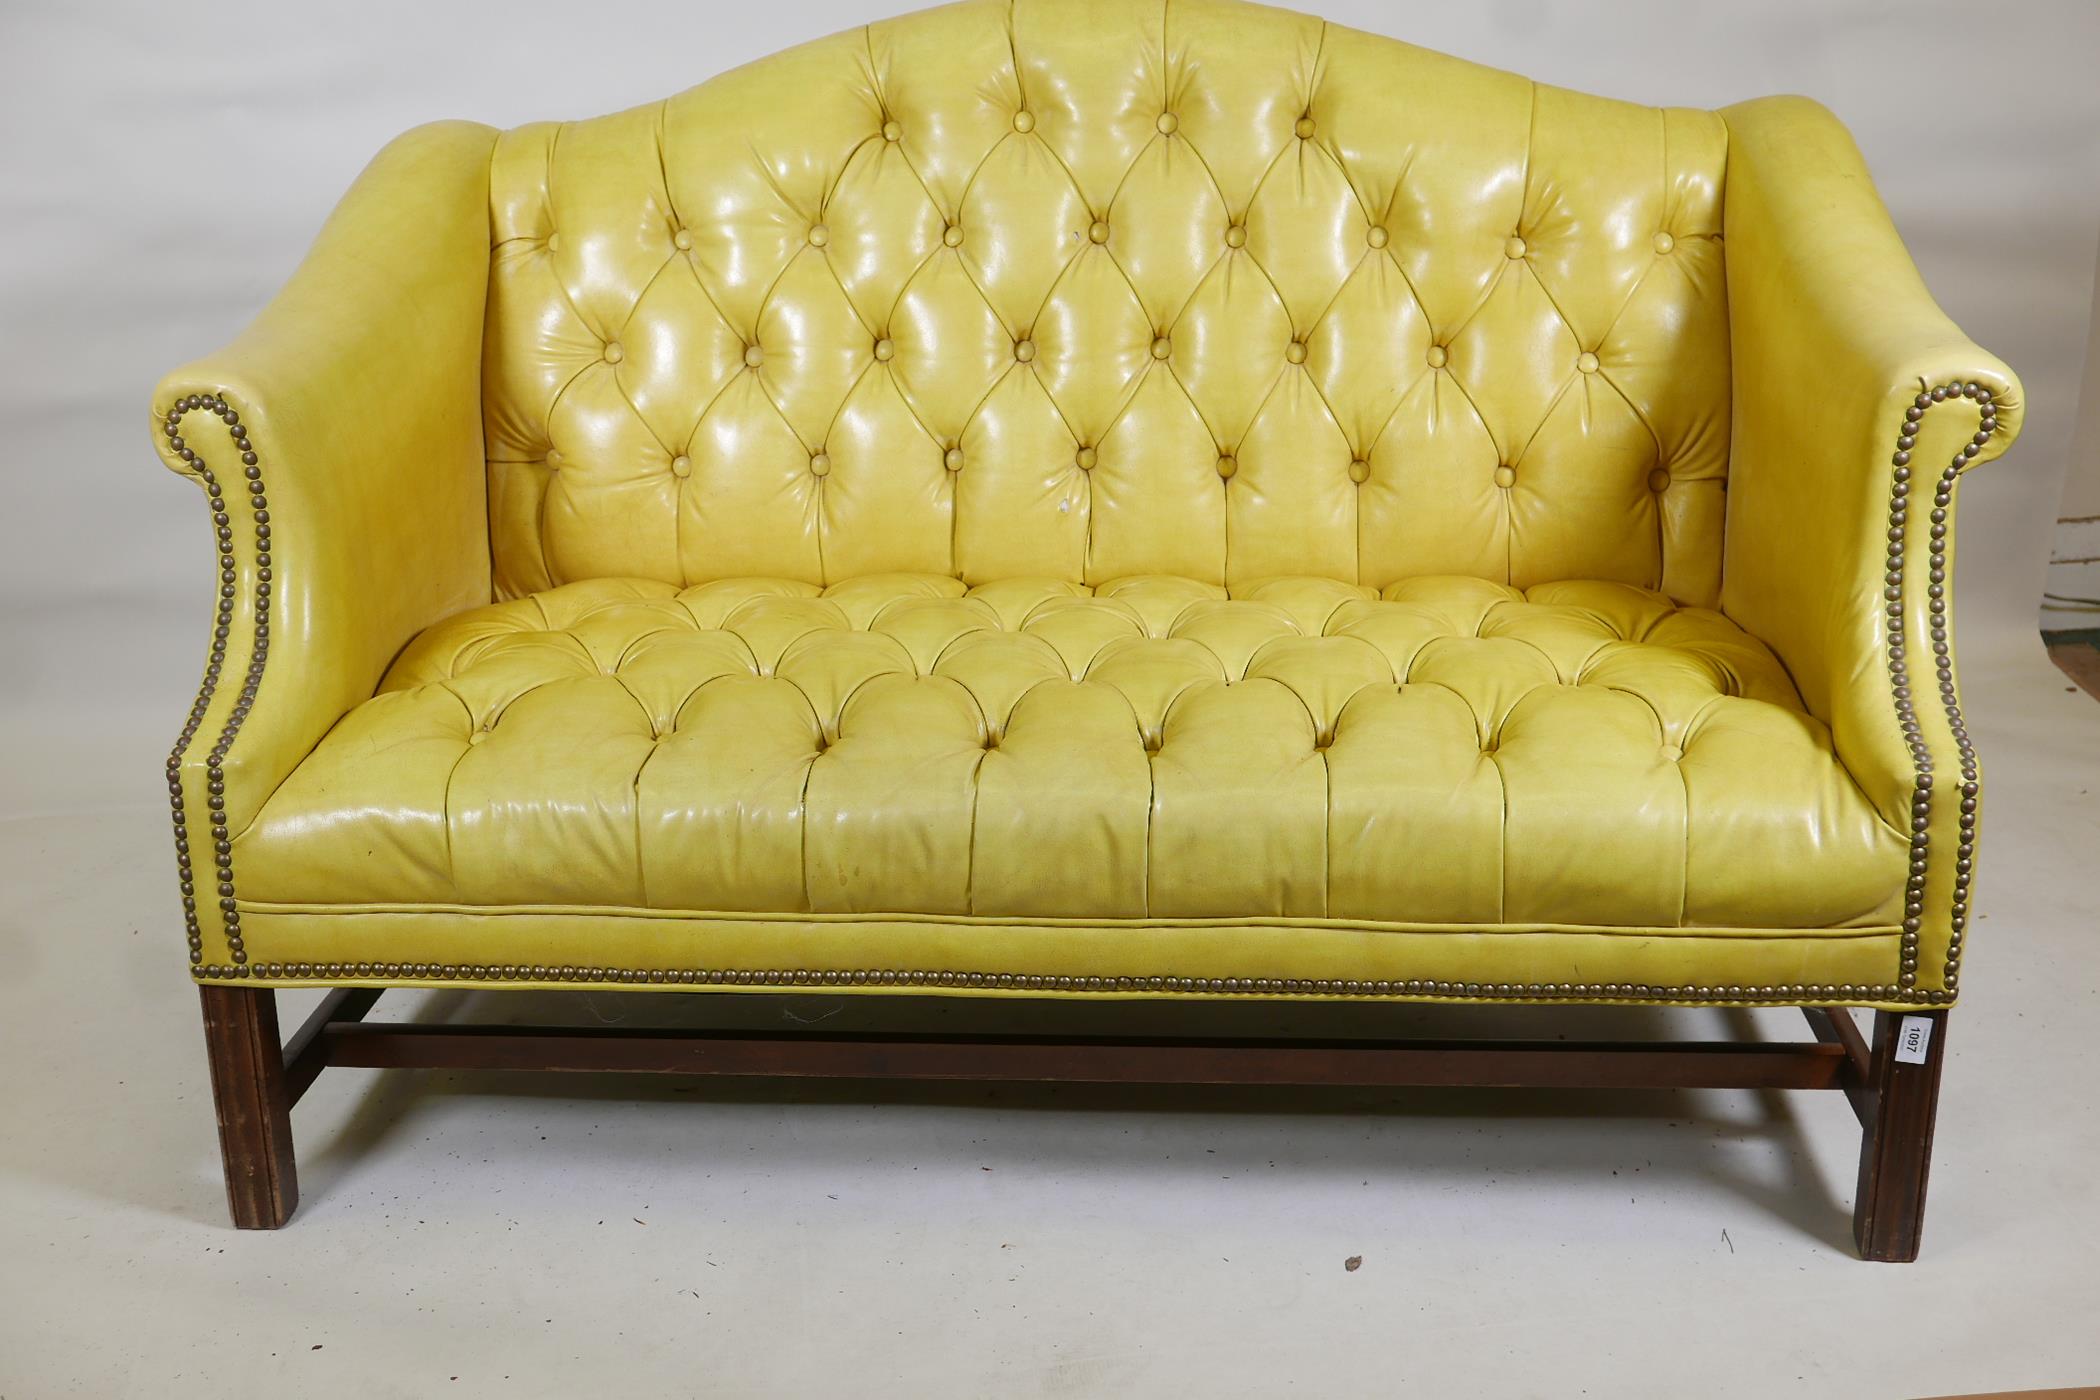 A Chippendale style buttoned leatherette two seater settee with brass studs and carved back and - Image 2 of 2